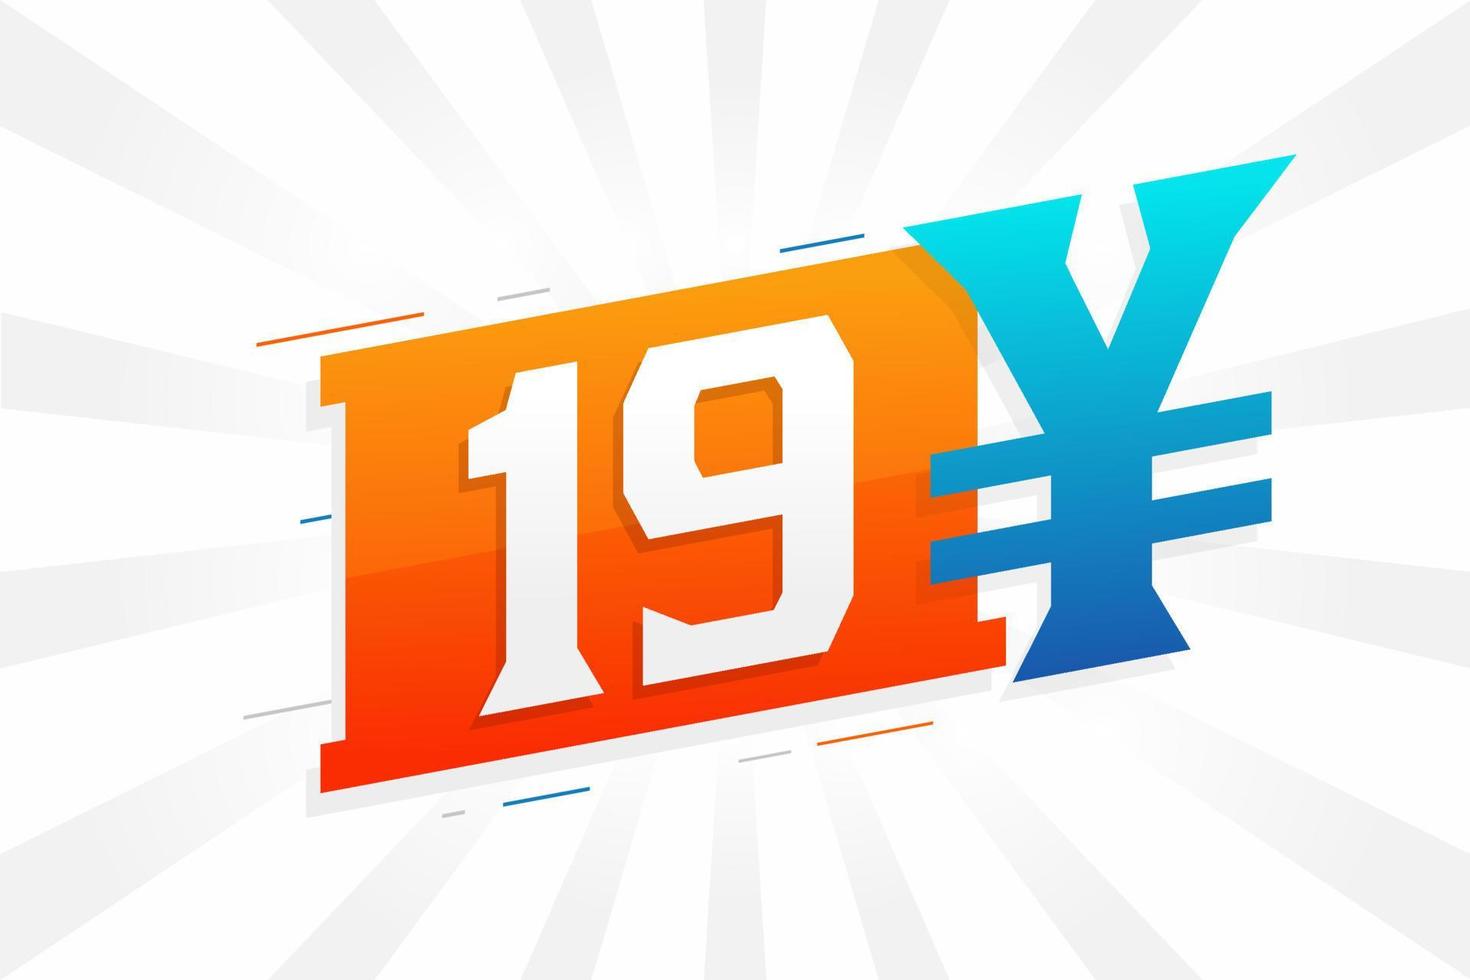 19 Yuan Chinese currency vector text symbol. 19 Yen Japanese currency Money stock vector